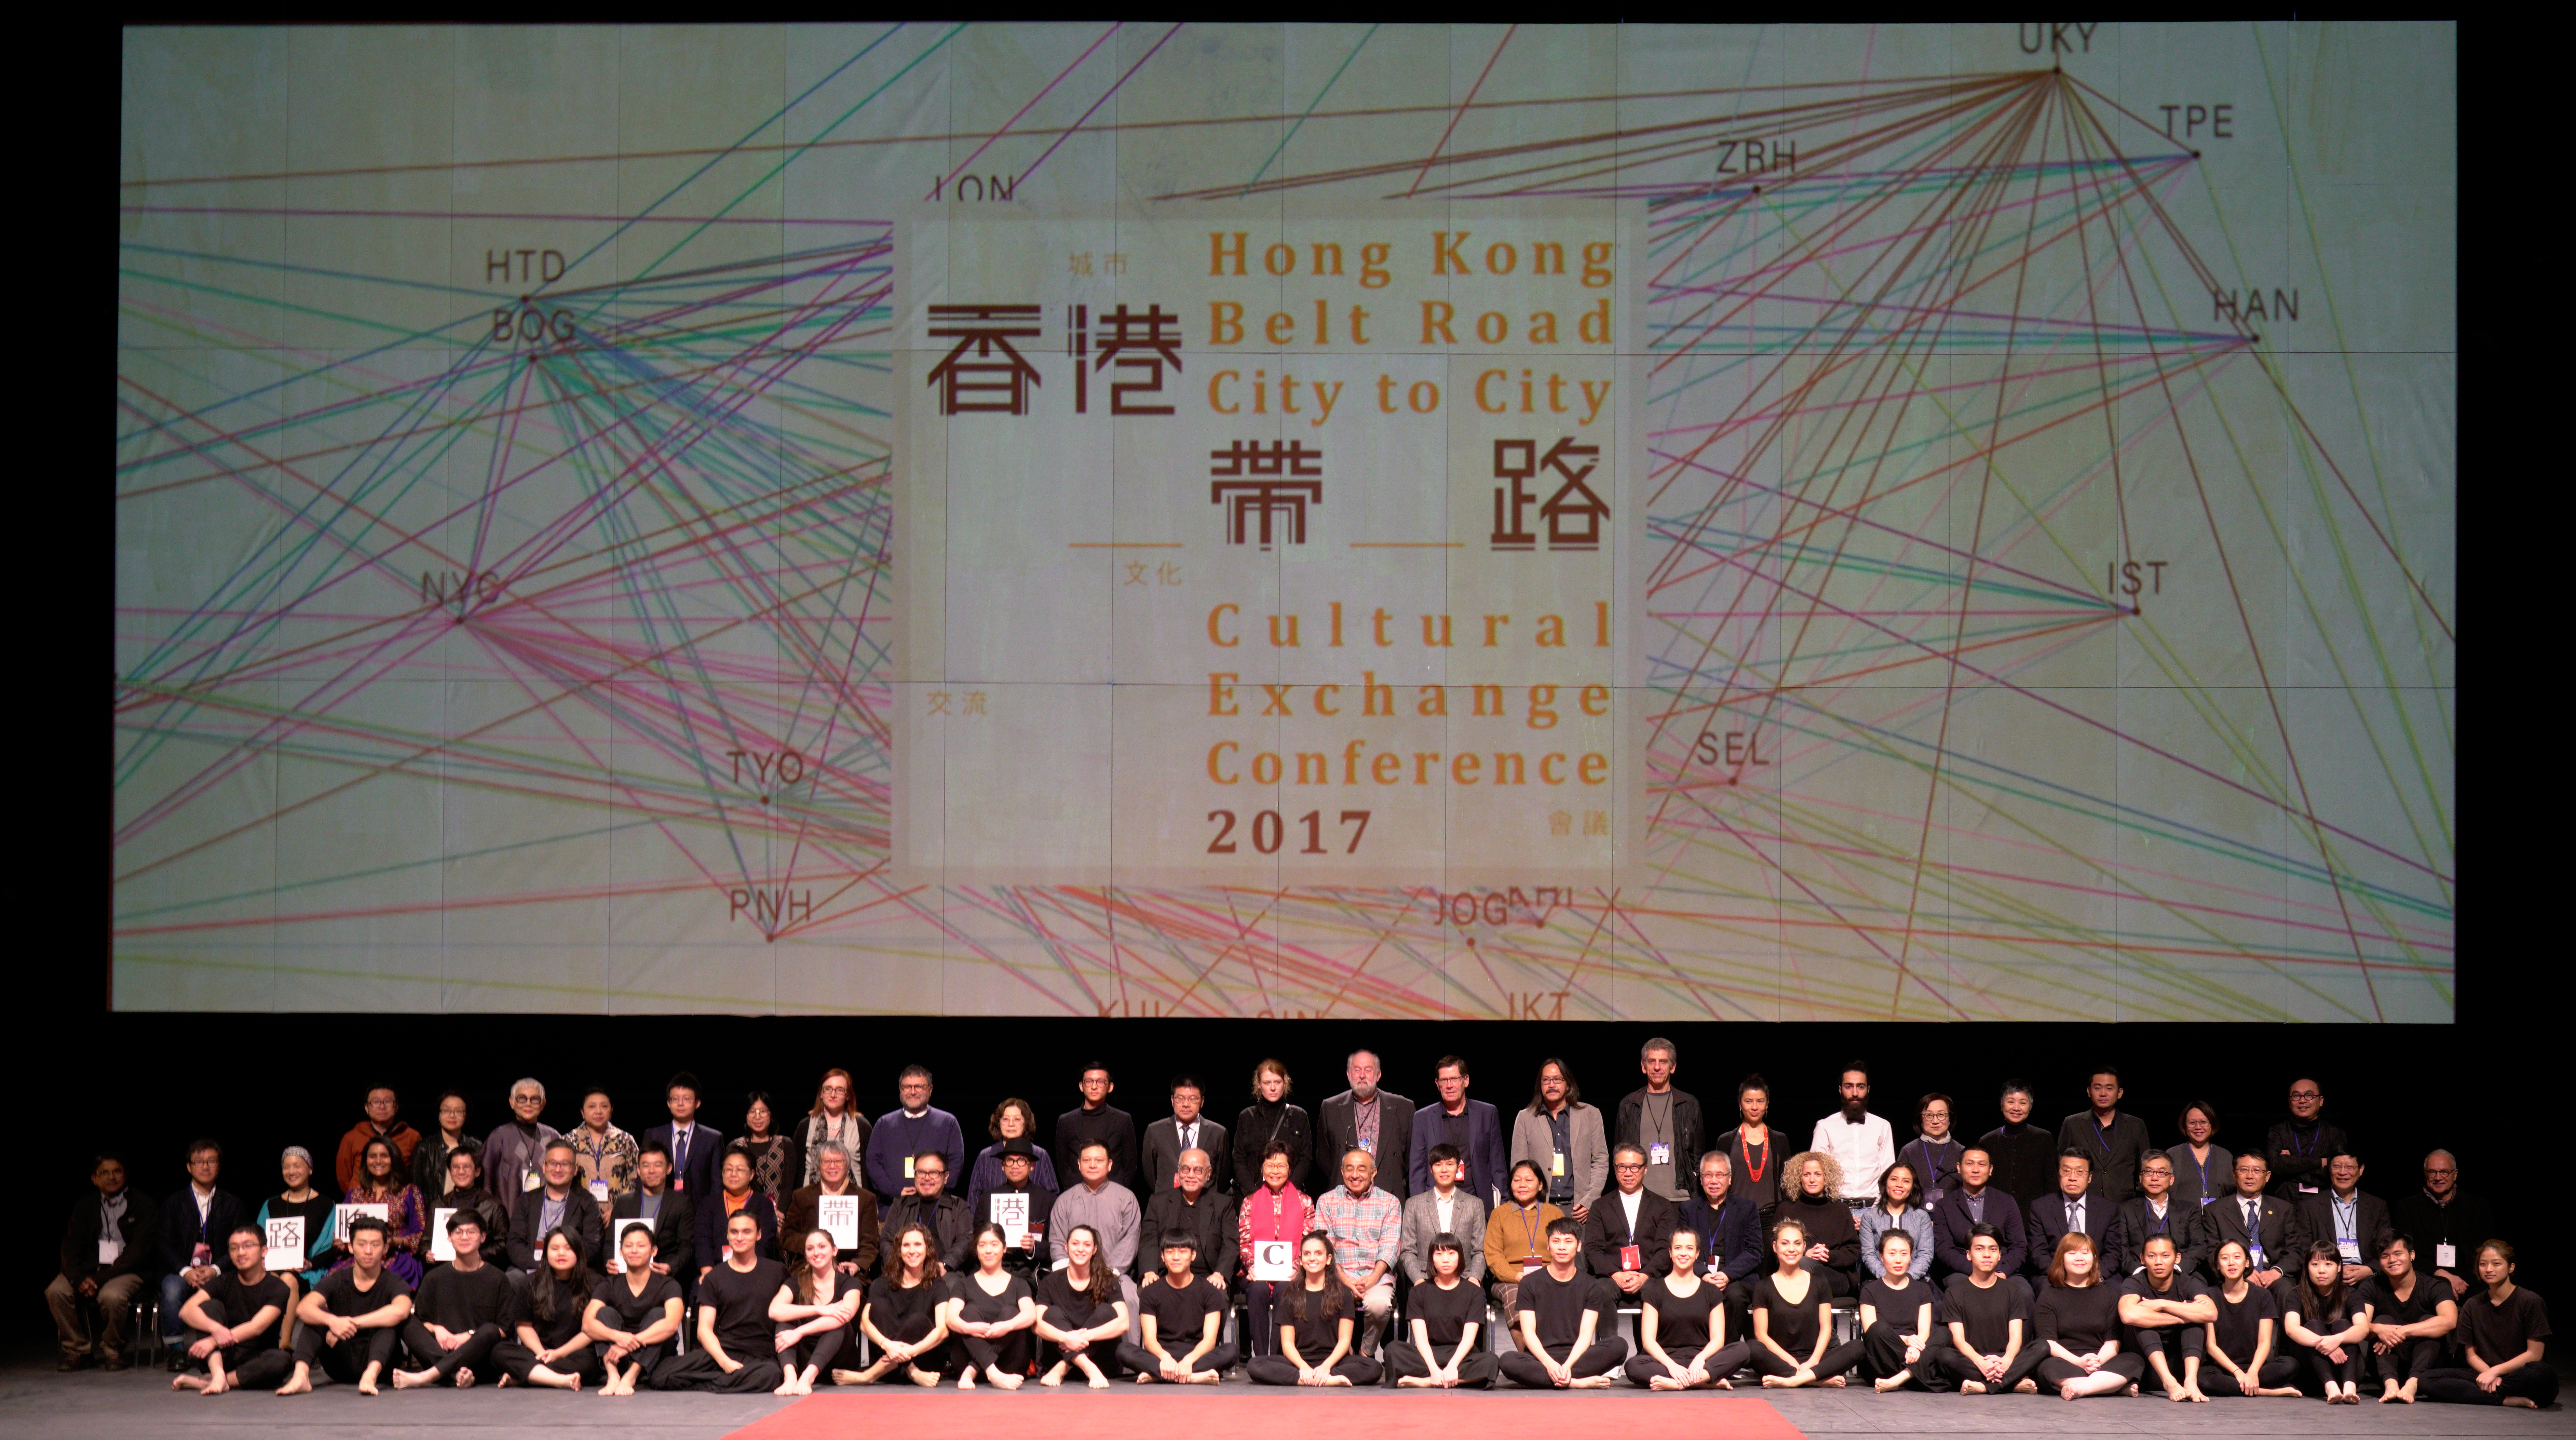 "Last year's conference" or "Hong Kong Belt-Road City-to-City Cultural Exchange Conference 2017"